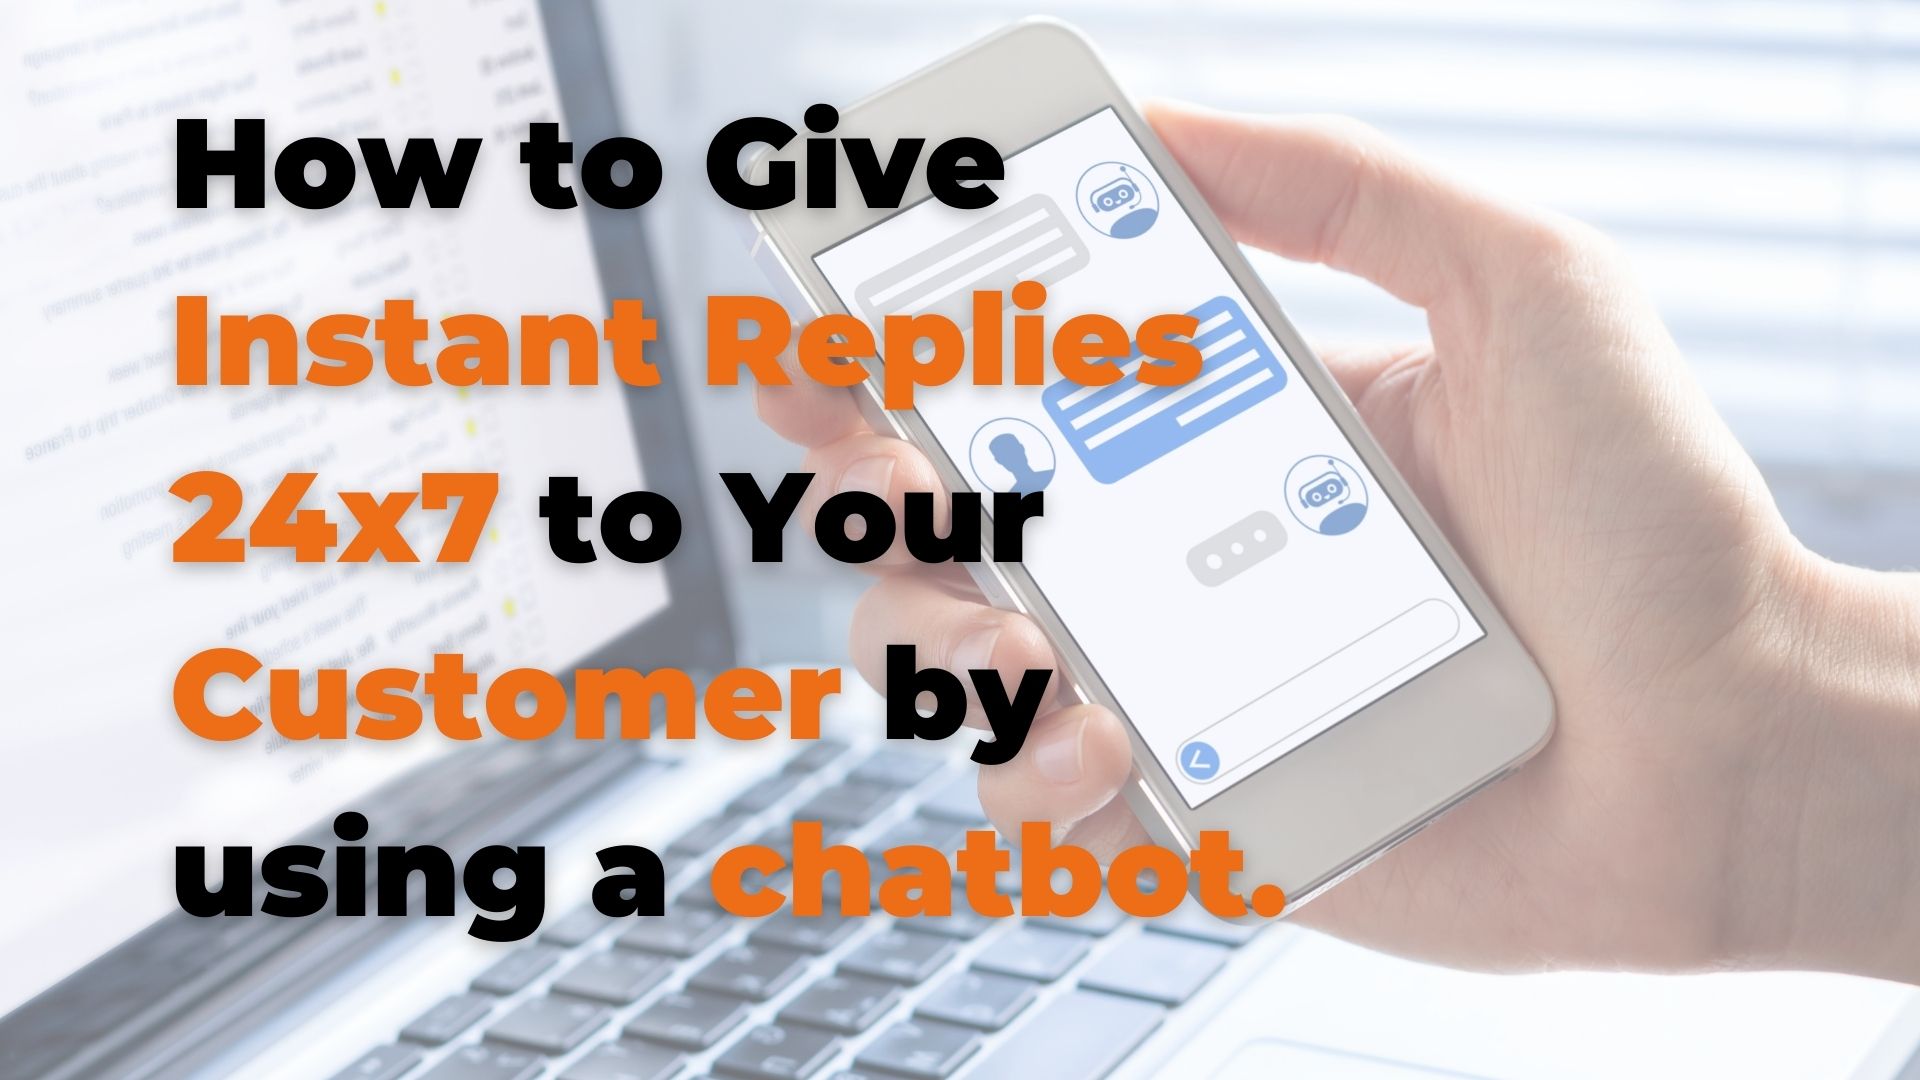 You are currently viewing How to Give Instant Replies 24×7 to Help Your Customer by using a chatbot.